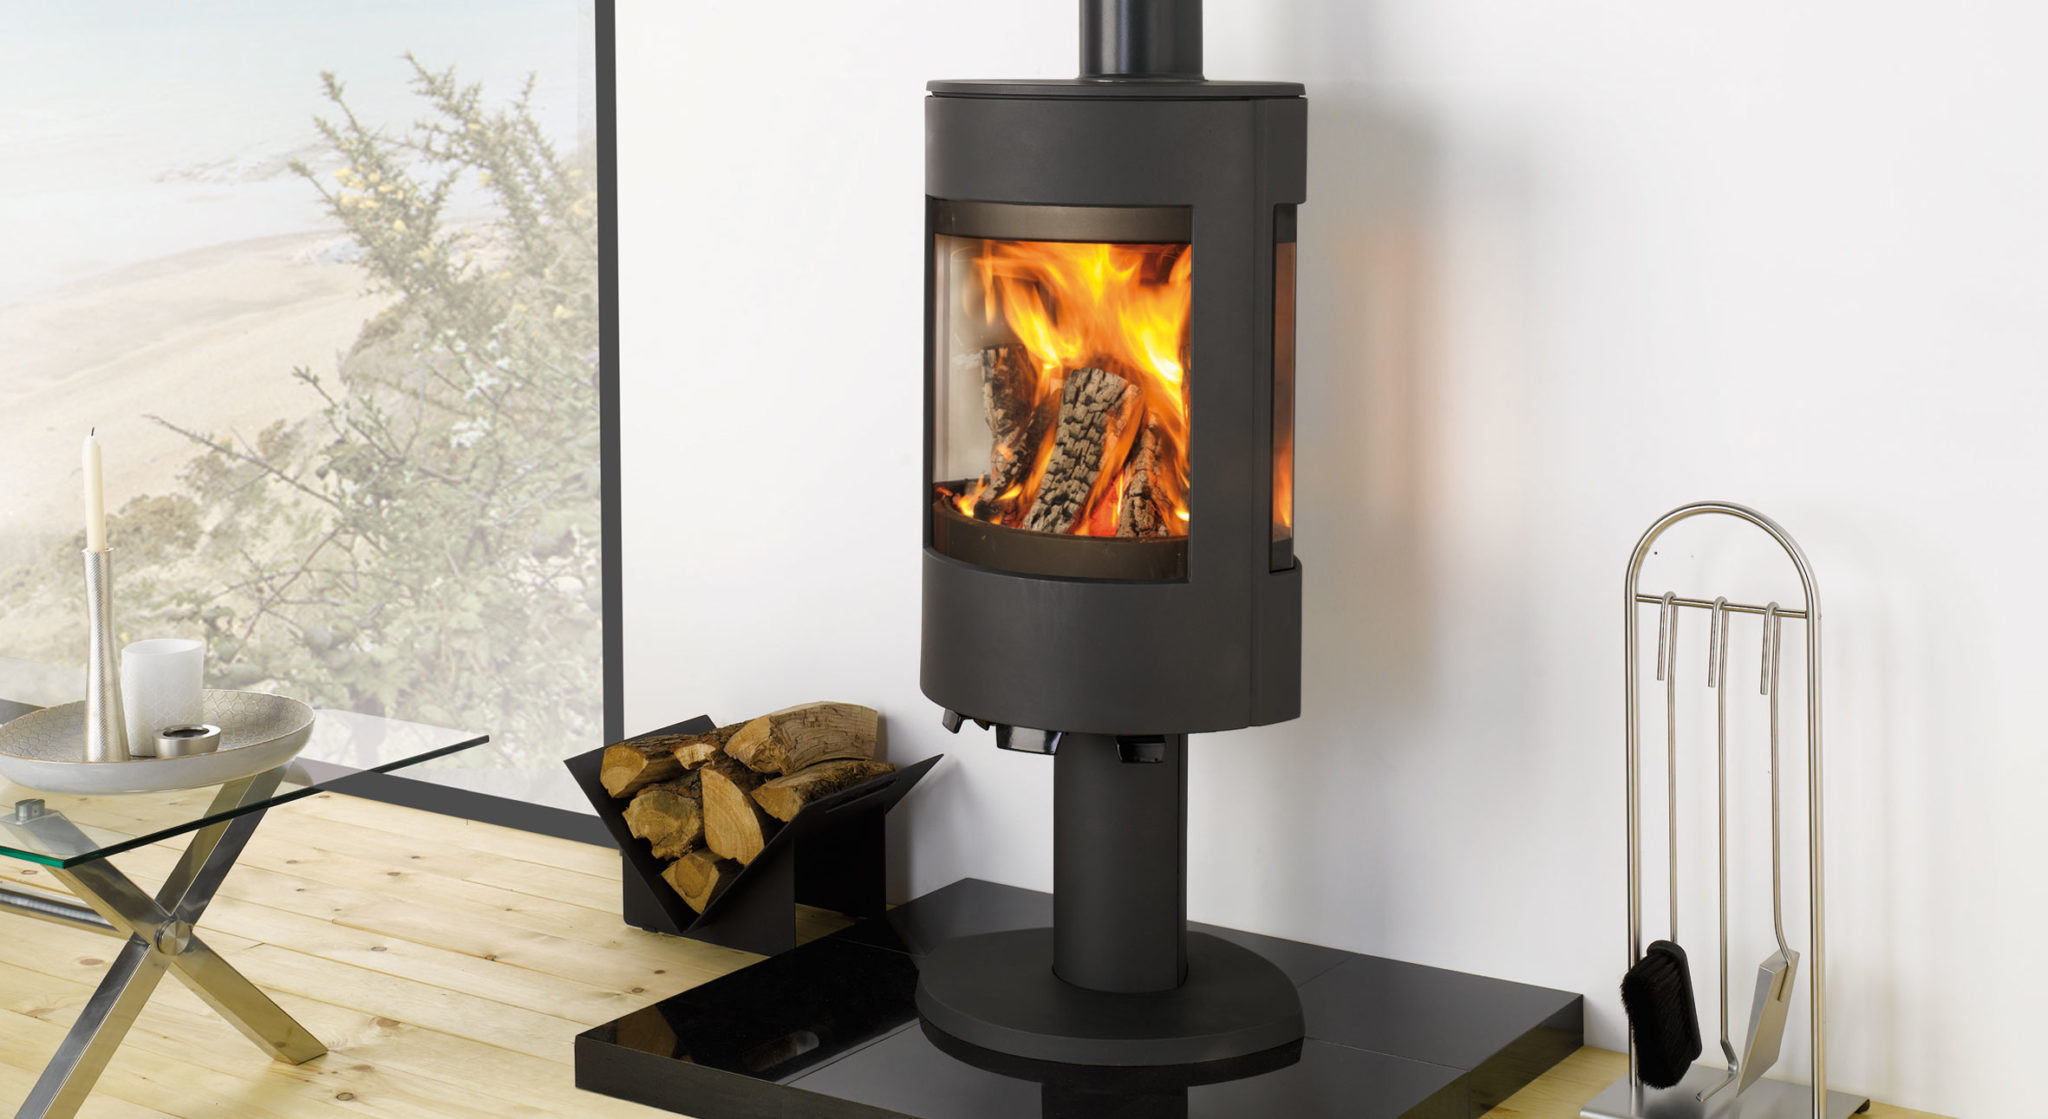 Heat your home with a Dovre!